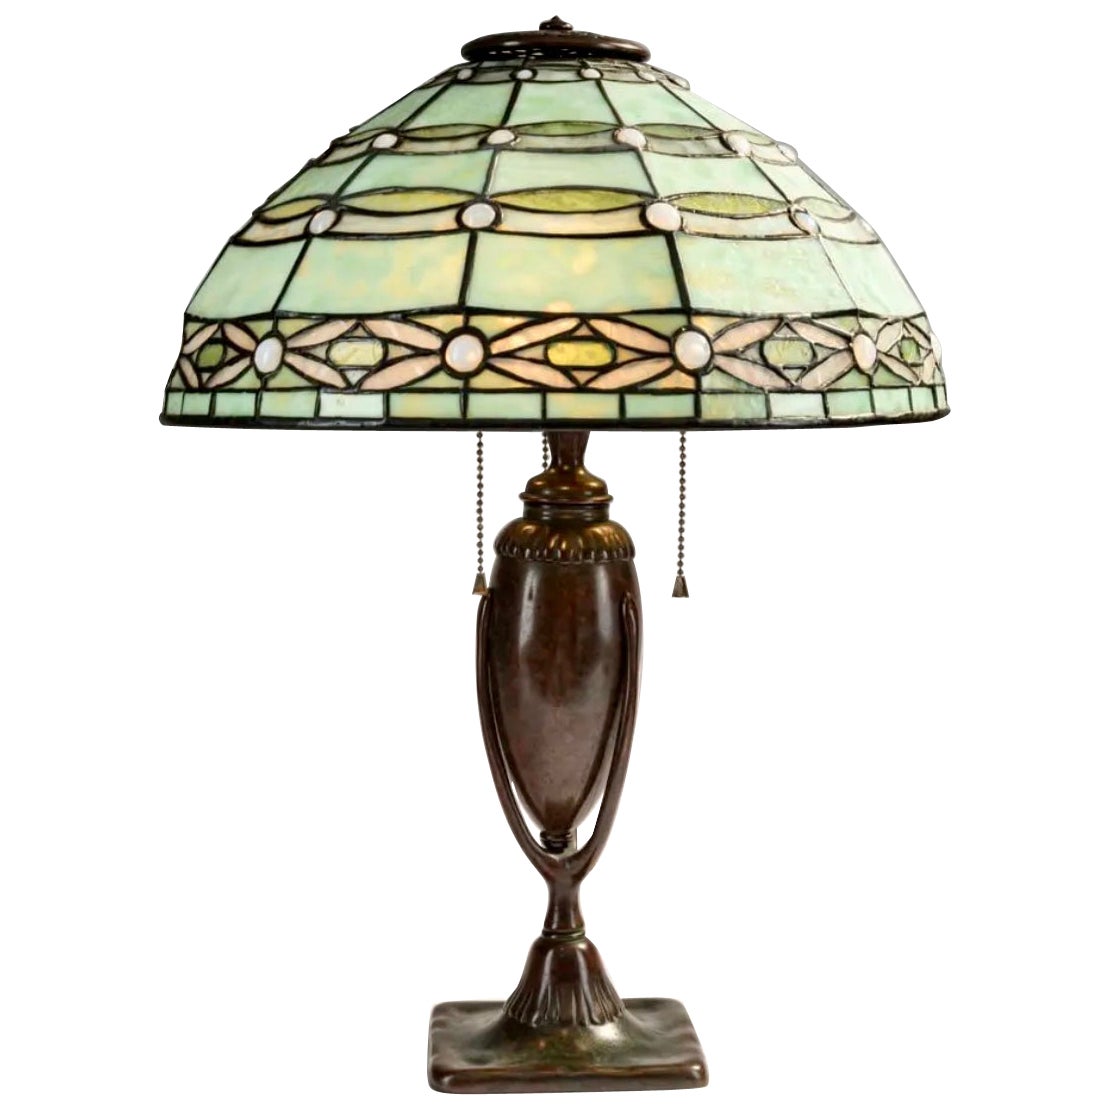 Tiffany Studios Jeweled Blossom Table Lamp For Sale